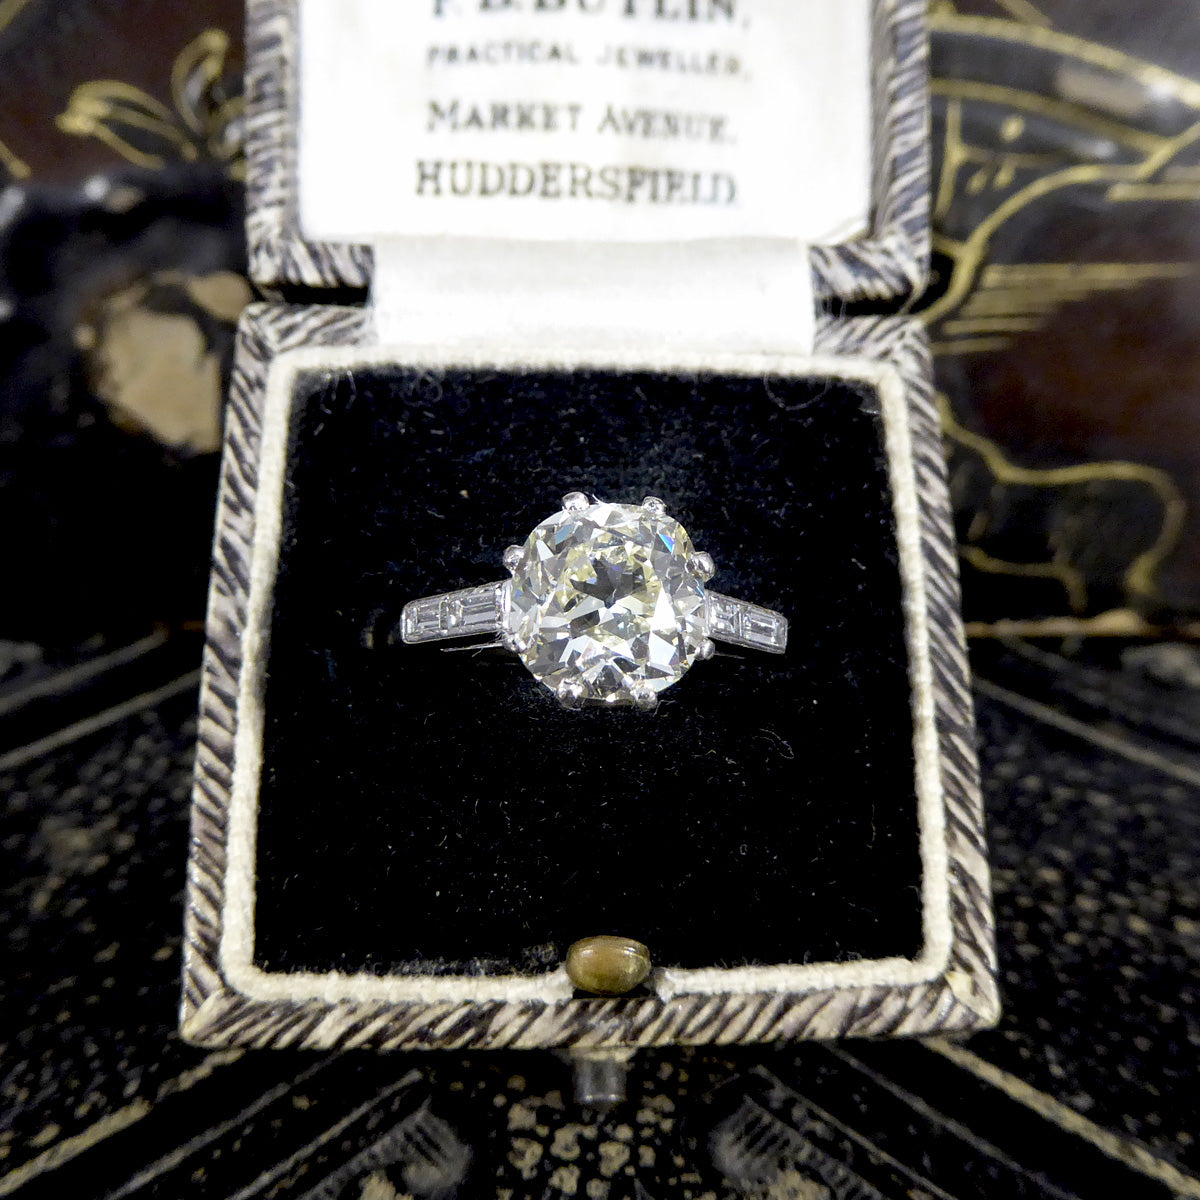 1920's 2.57ct Cushioned Shaped Old Mine Cut Diamond Engagement Ring with Shoulder in Platinum